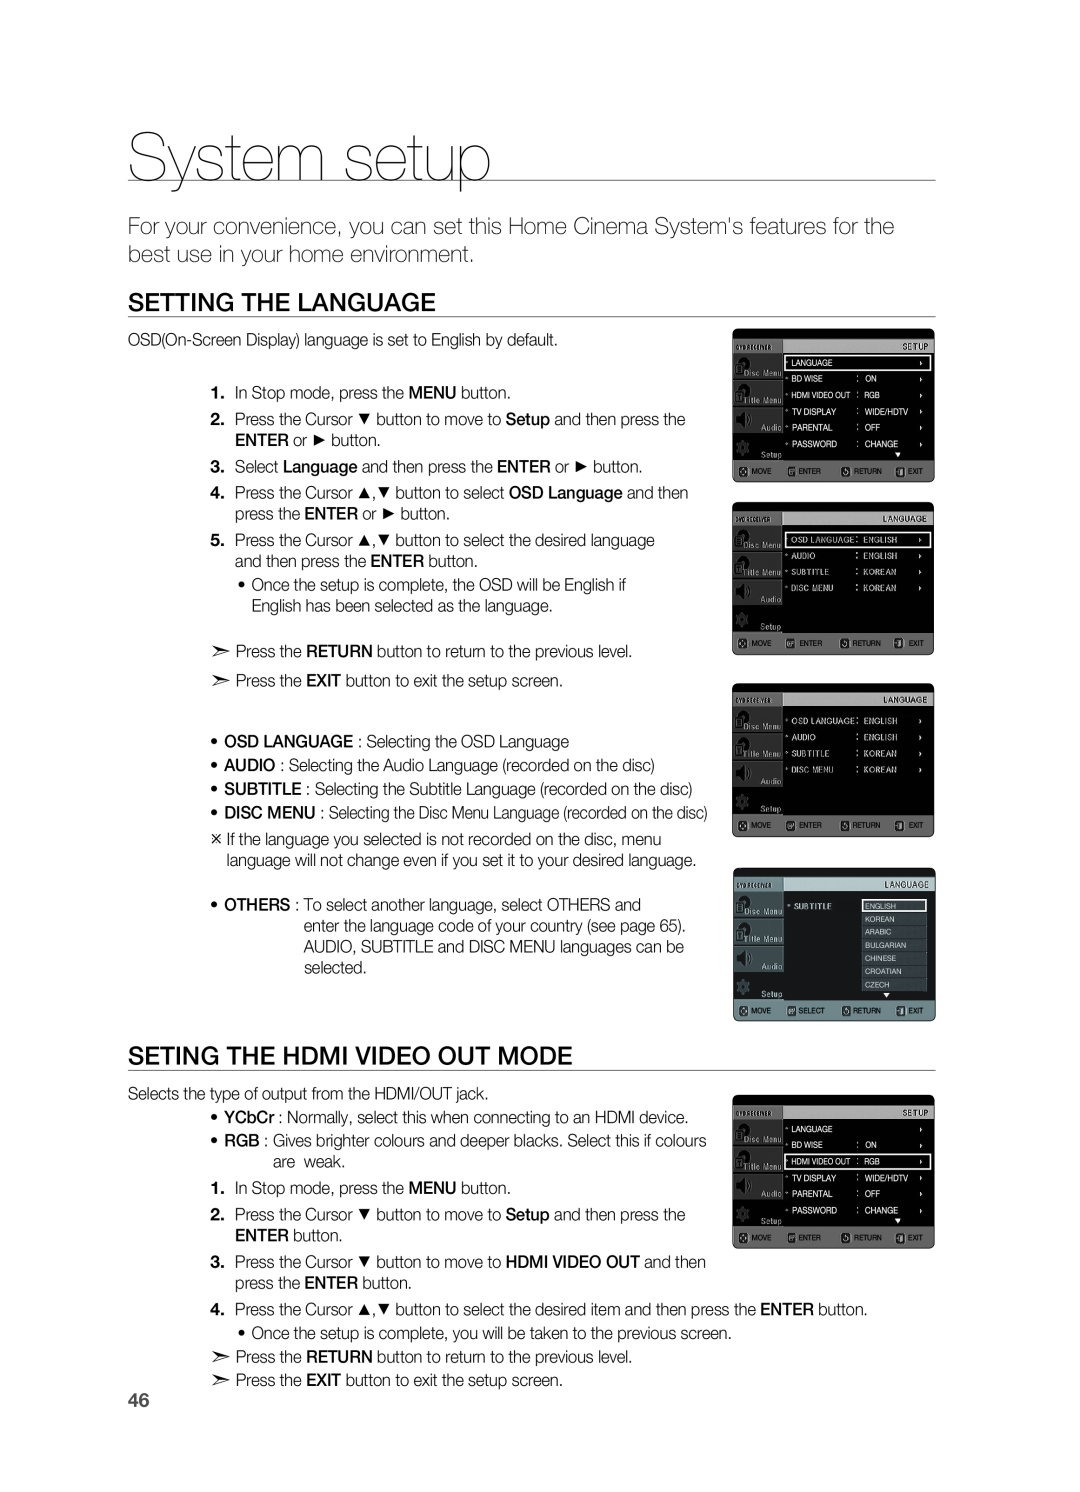 Samsung HT-TX725G, HT-X725G user manual System setup, Setting the Language, Seting the HDMI VIDEO OUT MODE 